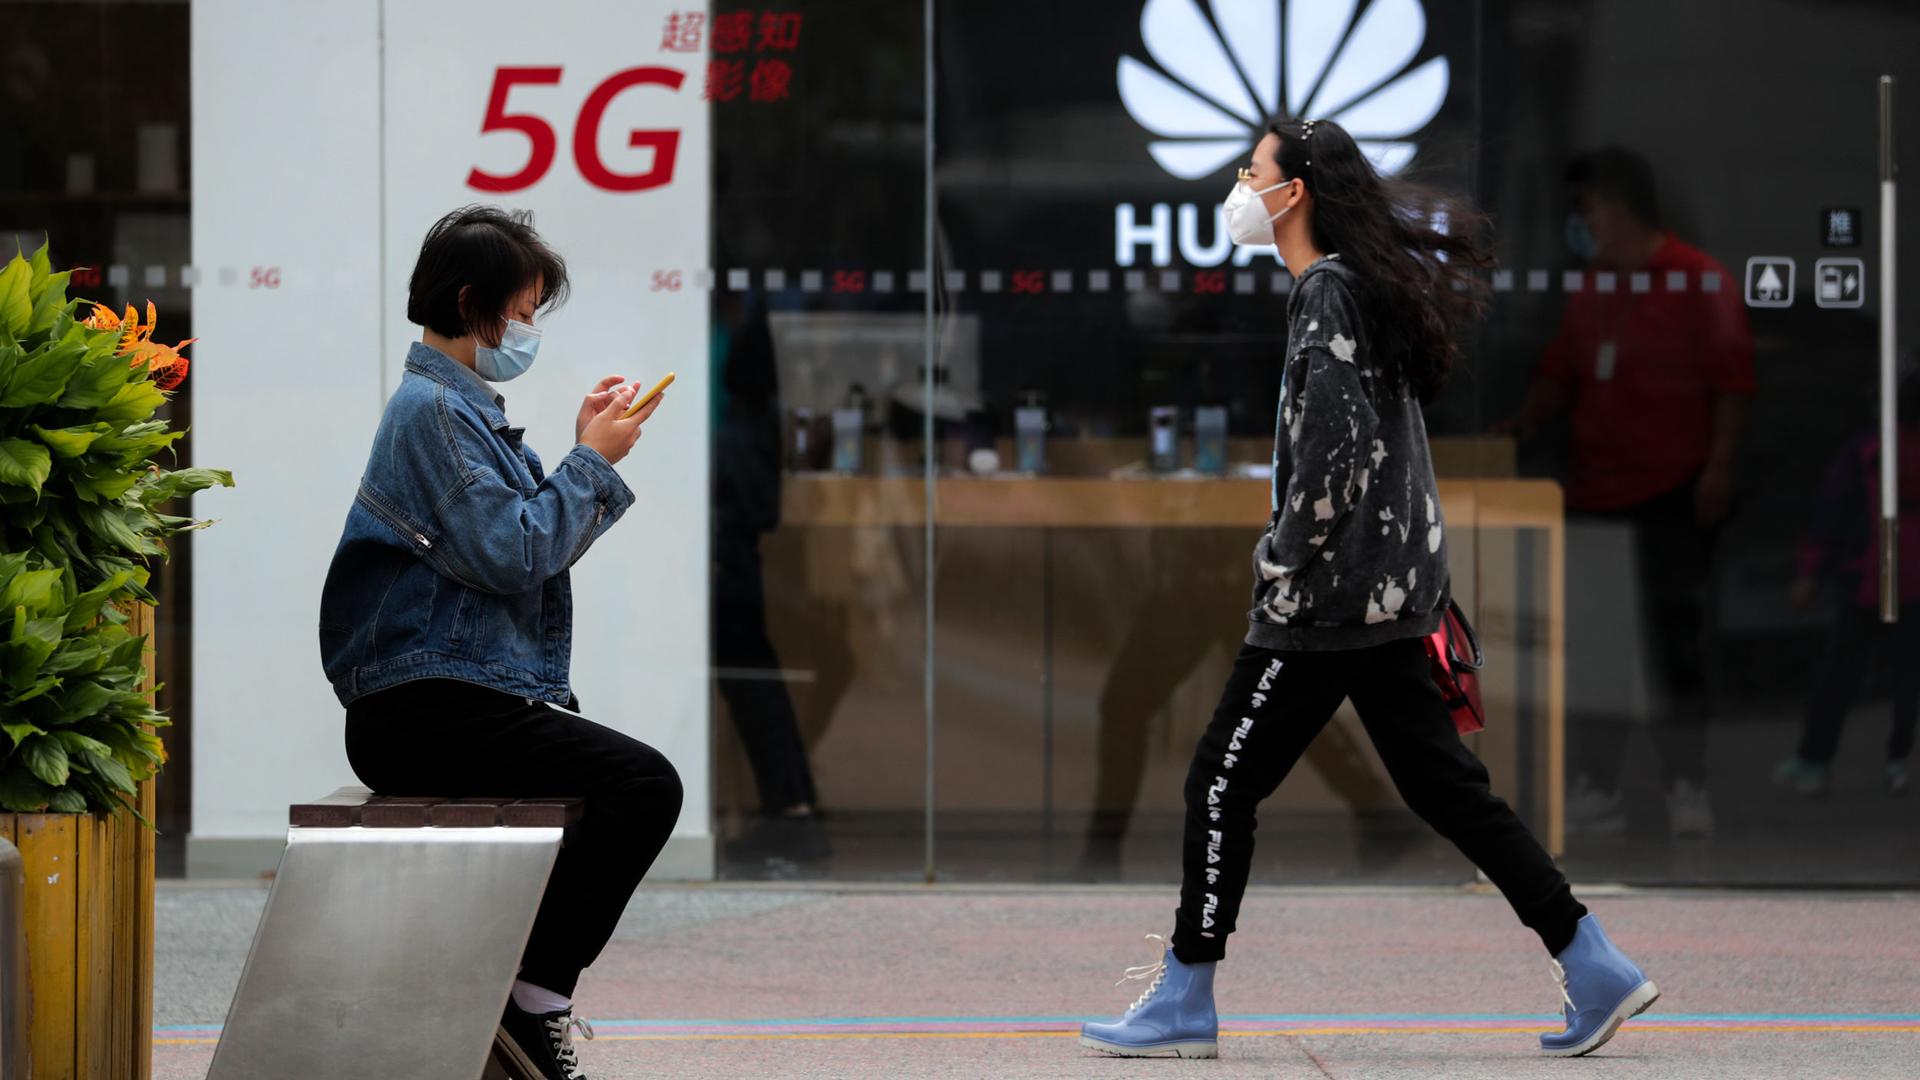 A woman wearing a jean jacket is shown sitting on a bench as anothe woman walks toward her with the clear glass of a Huawei store in the distance.